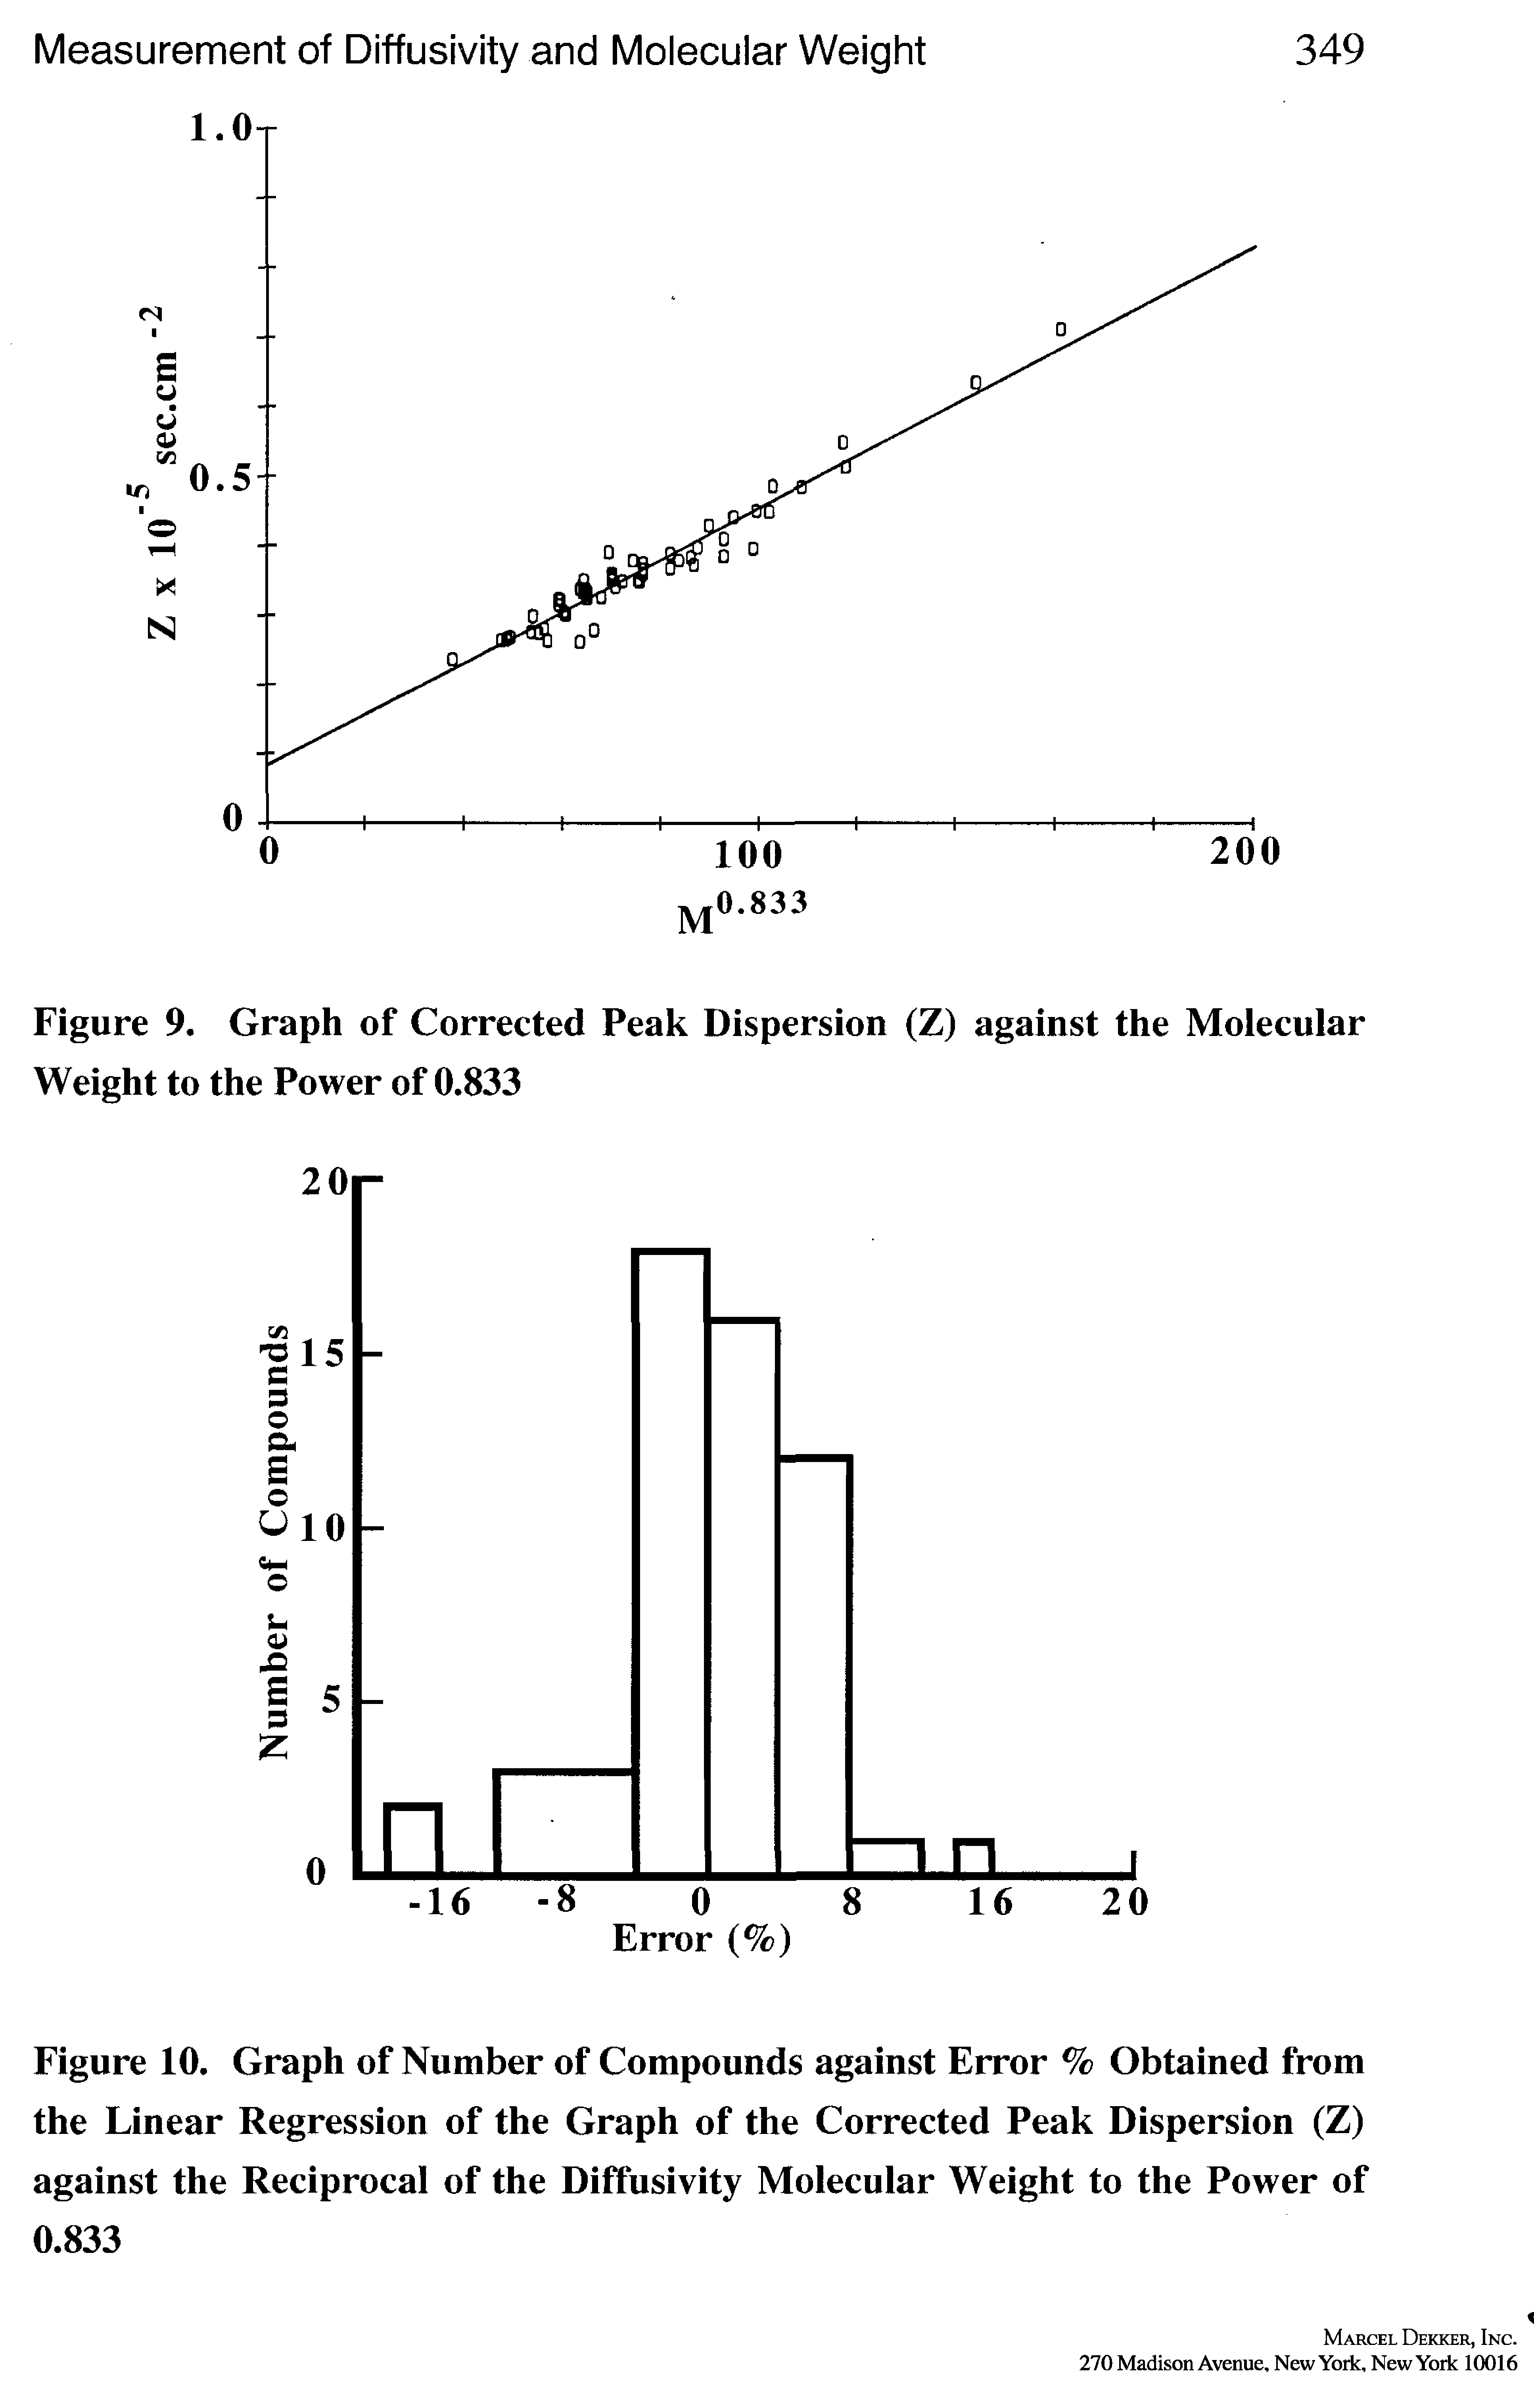 Figure 10. Graph of Number of Compounds against Error % Obtained from the Linear Regression of the Graph of the Corrected Peak Dispersion (Z) against the Reciprocal of the Diffusivity Molecular Weight to the Power of 0.833...